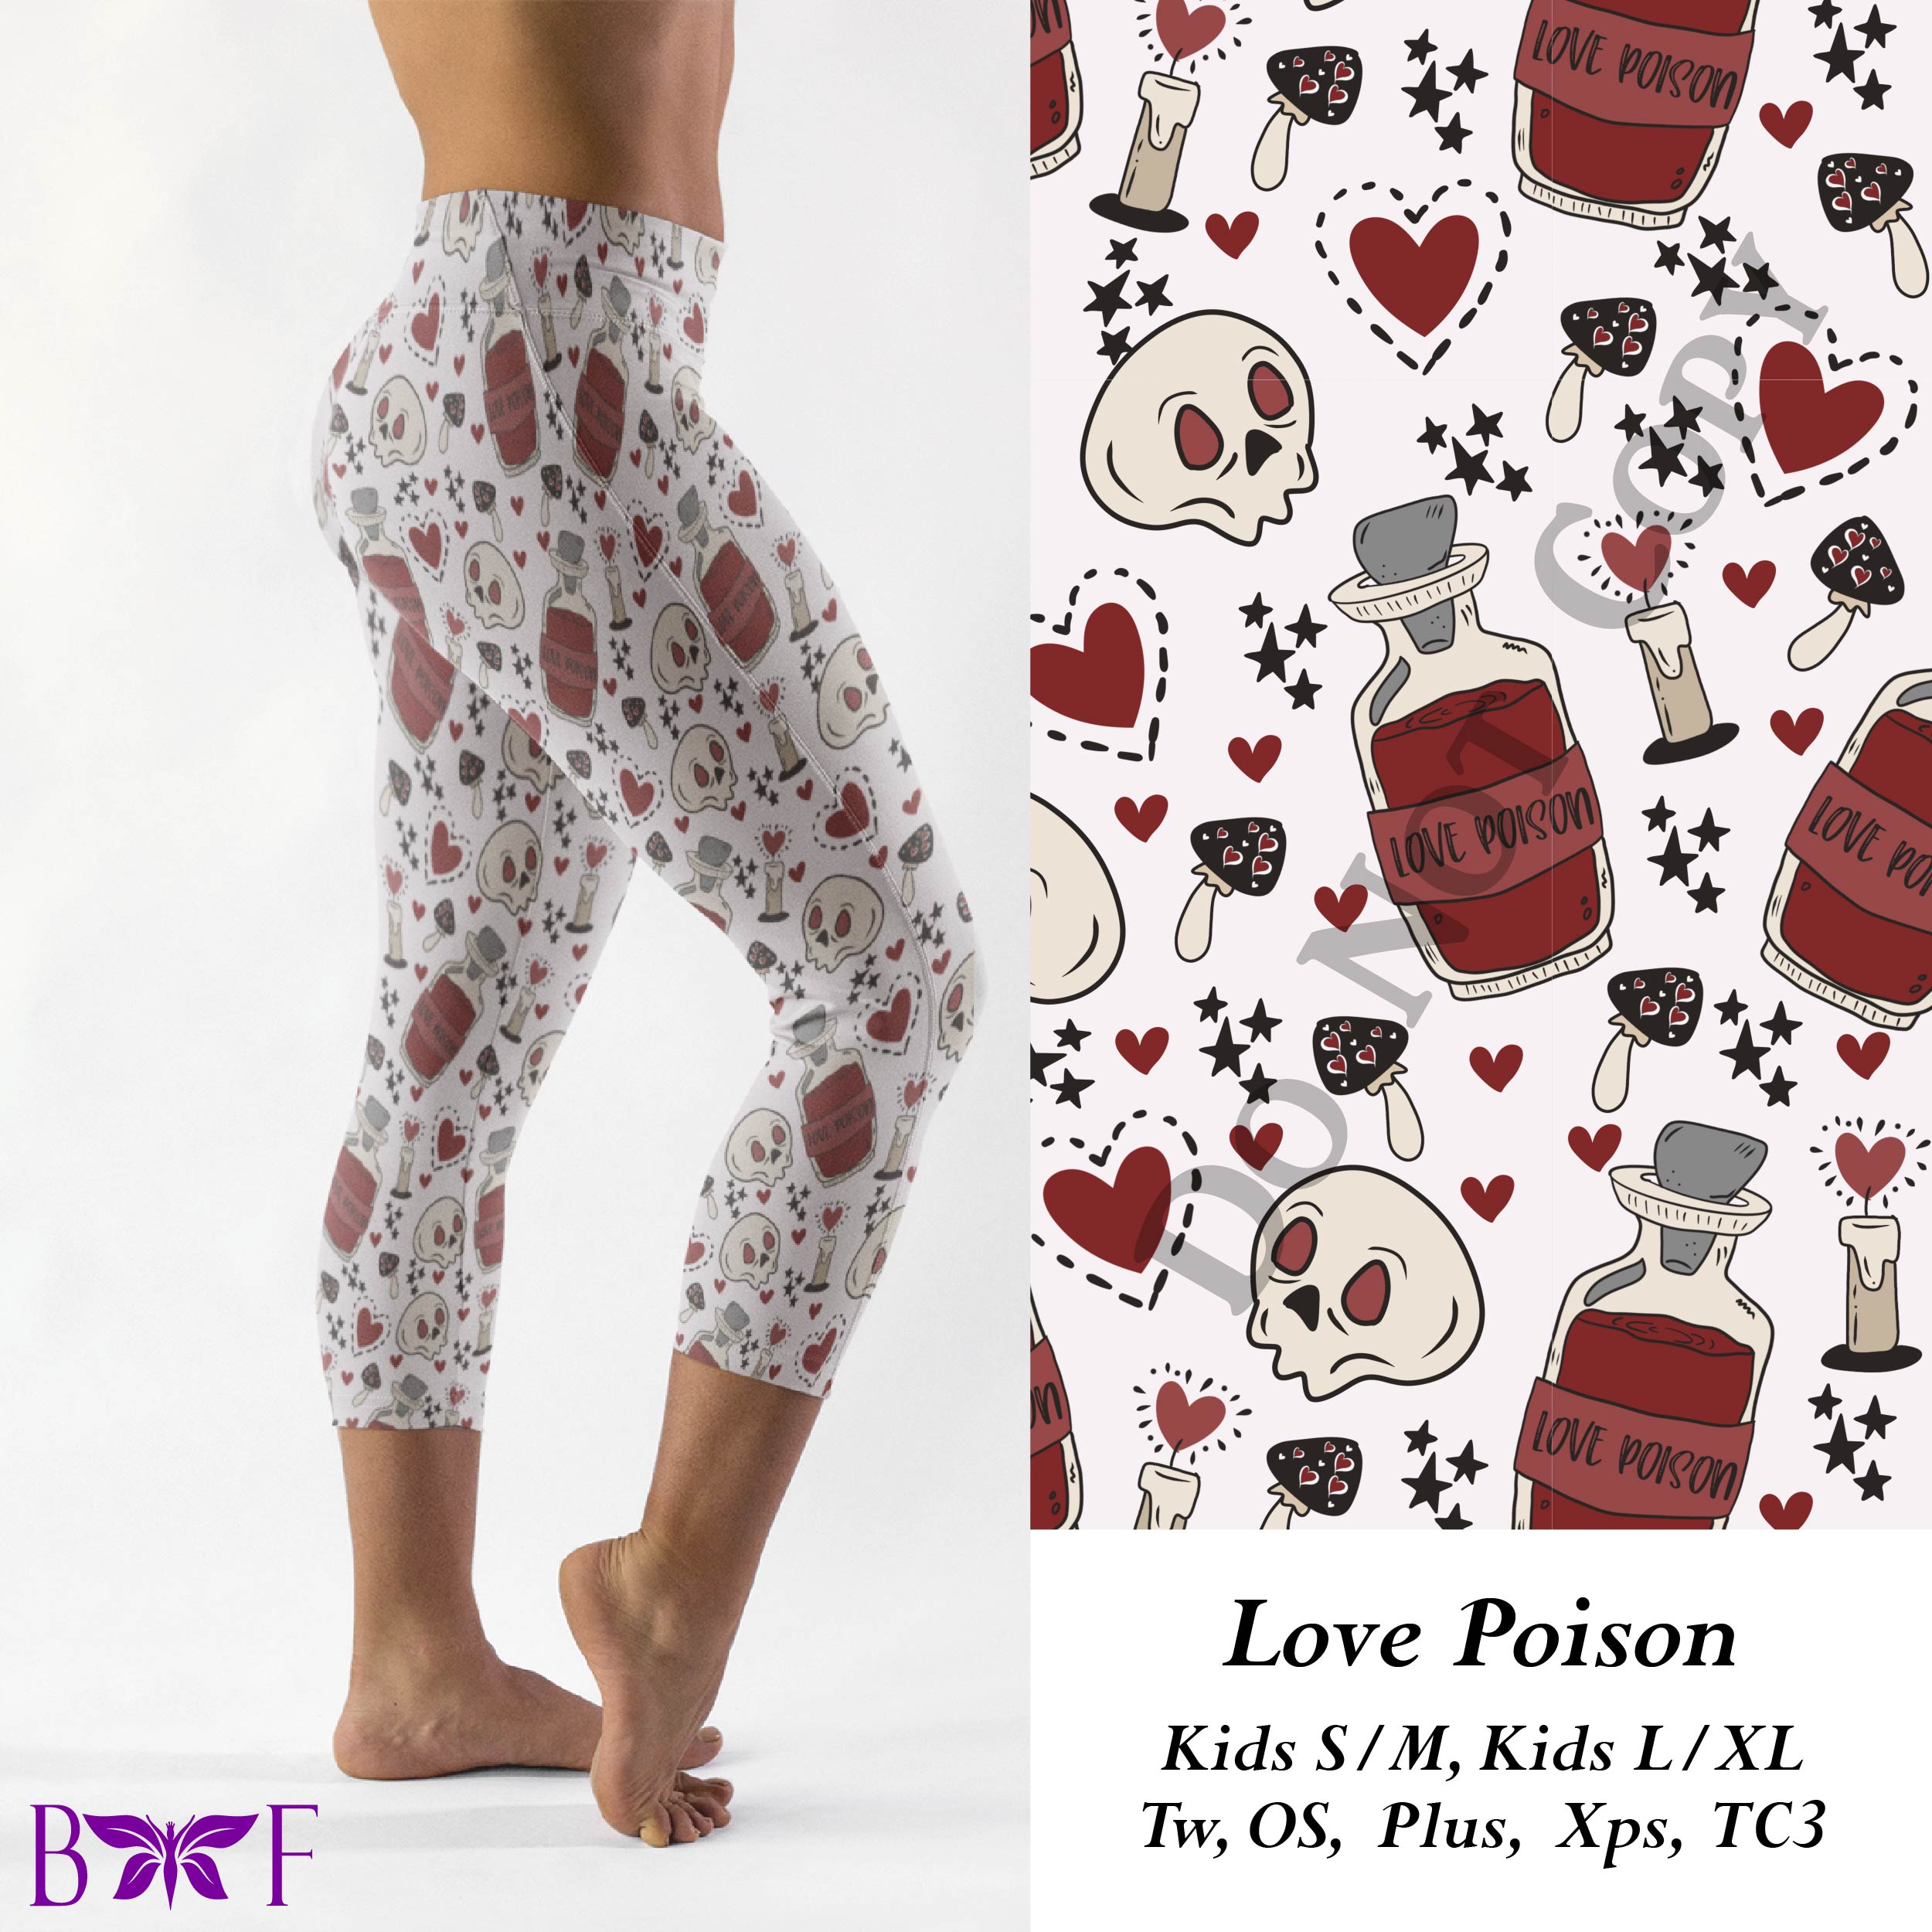 Love Poison leggings with pockets.